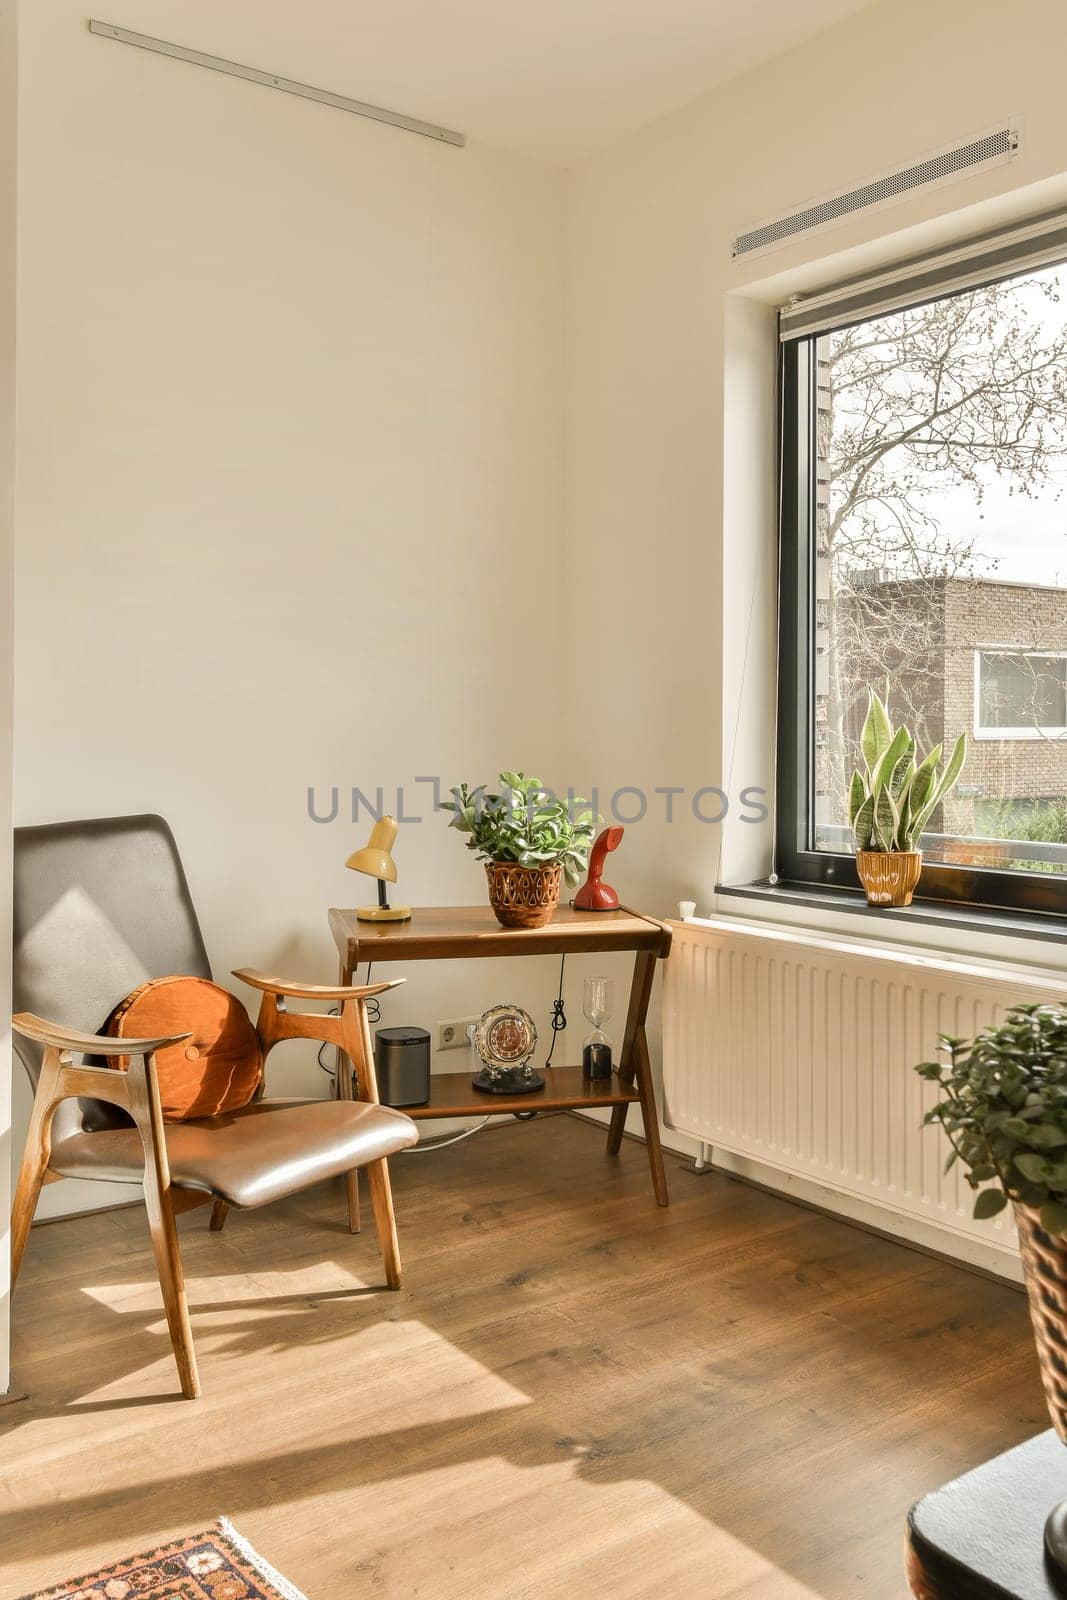 a living room with some plants in the window sies and an old chair on the floor next to it